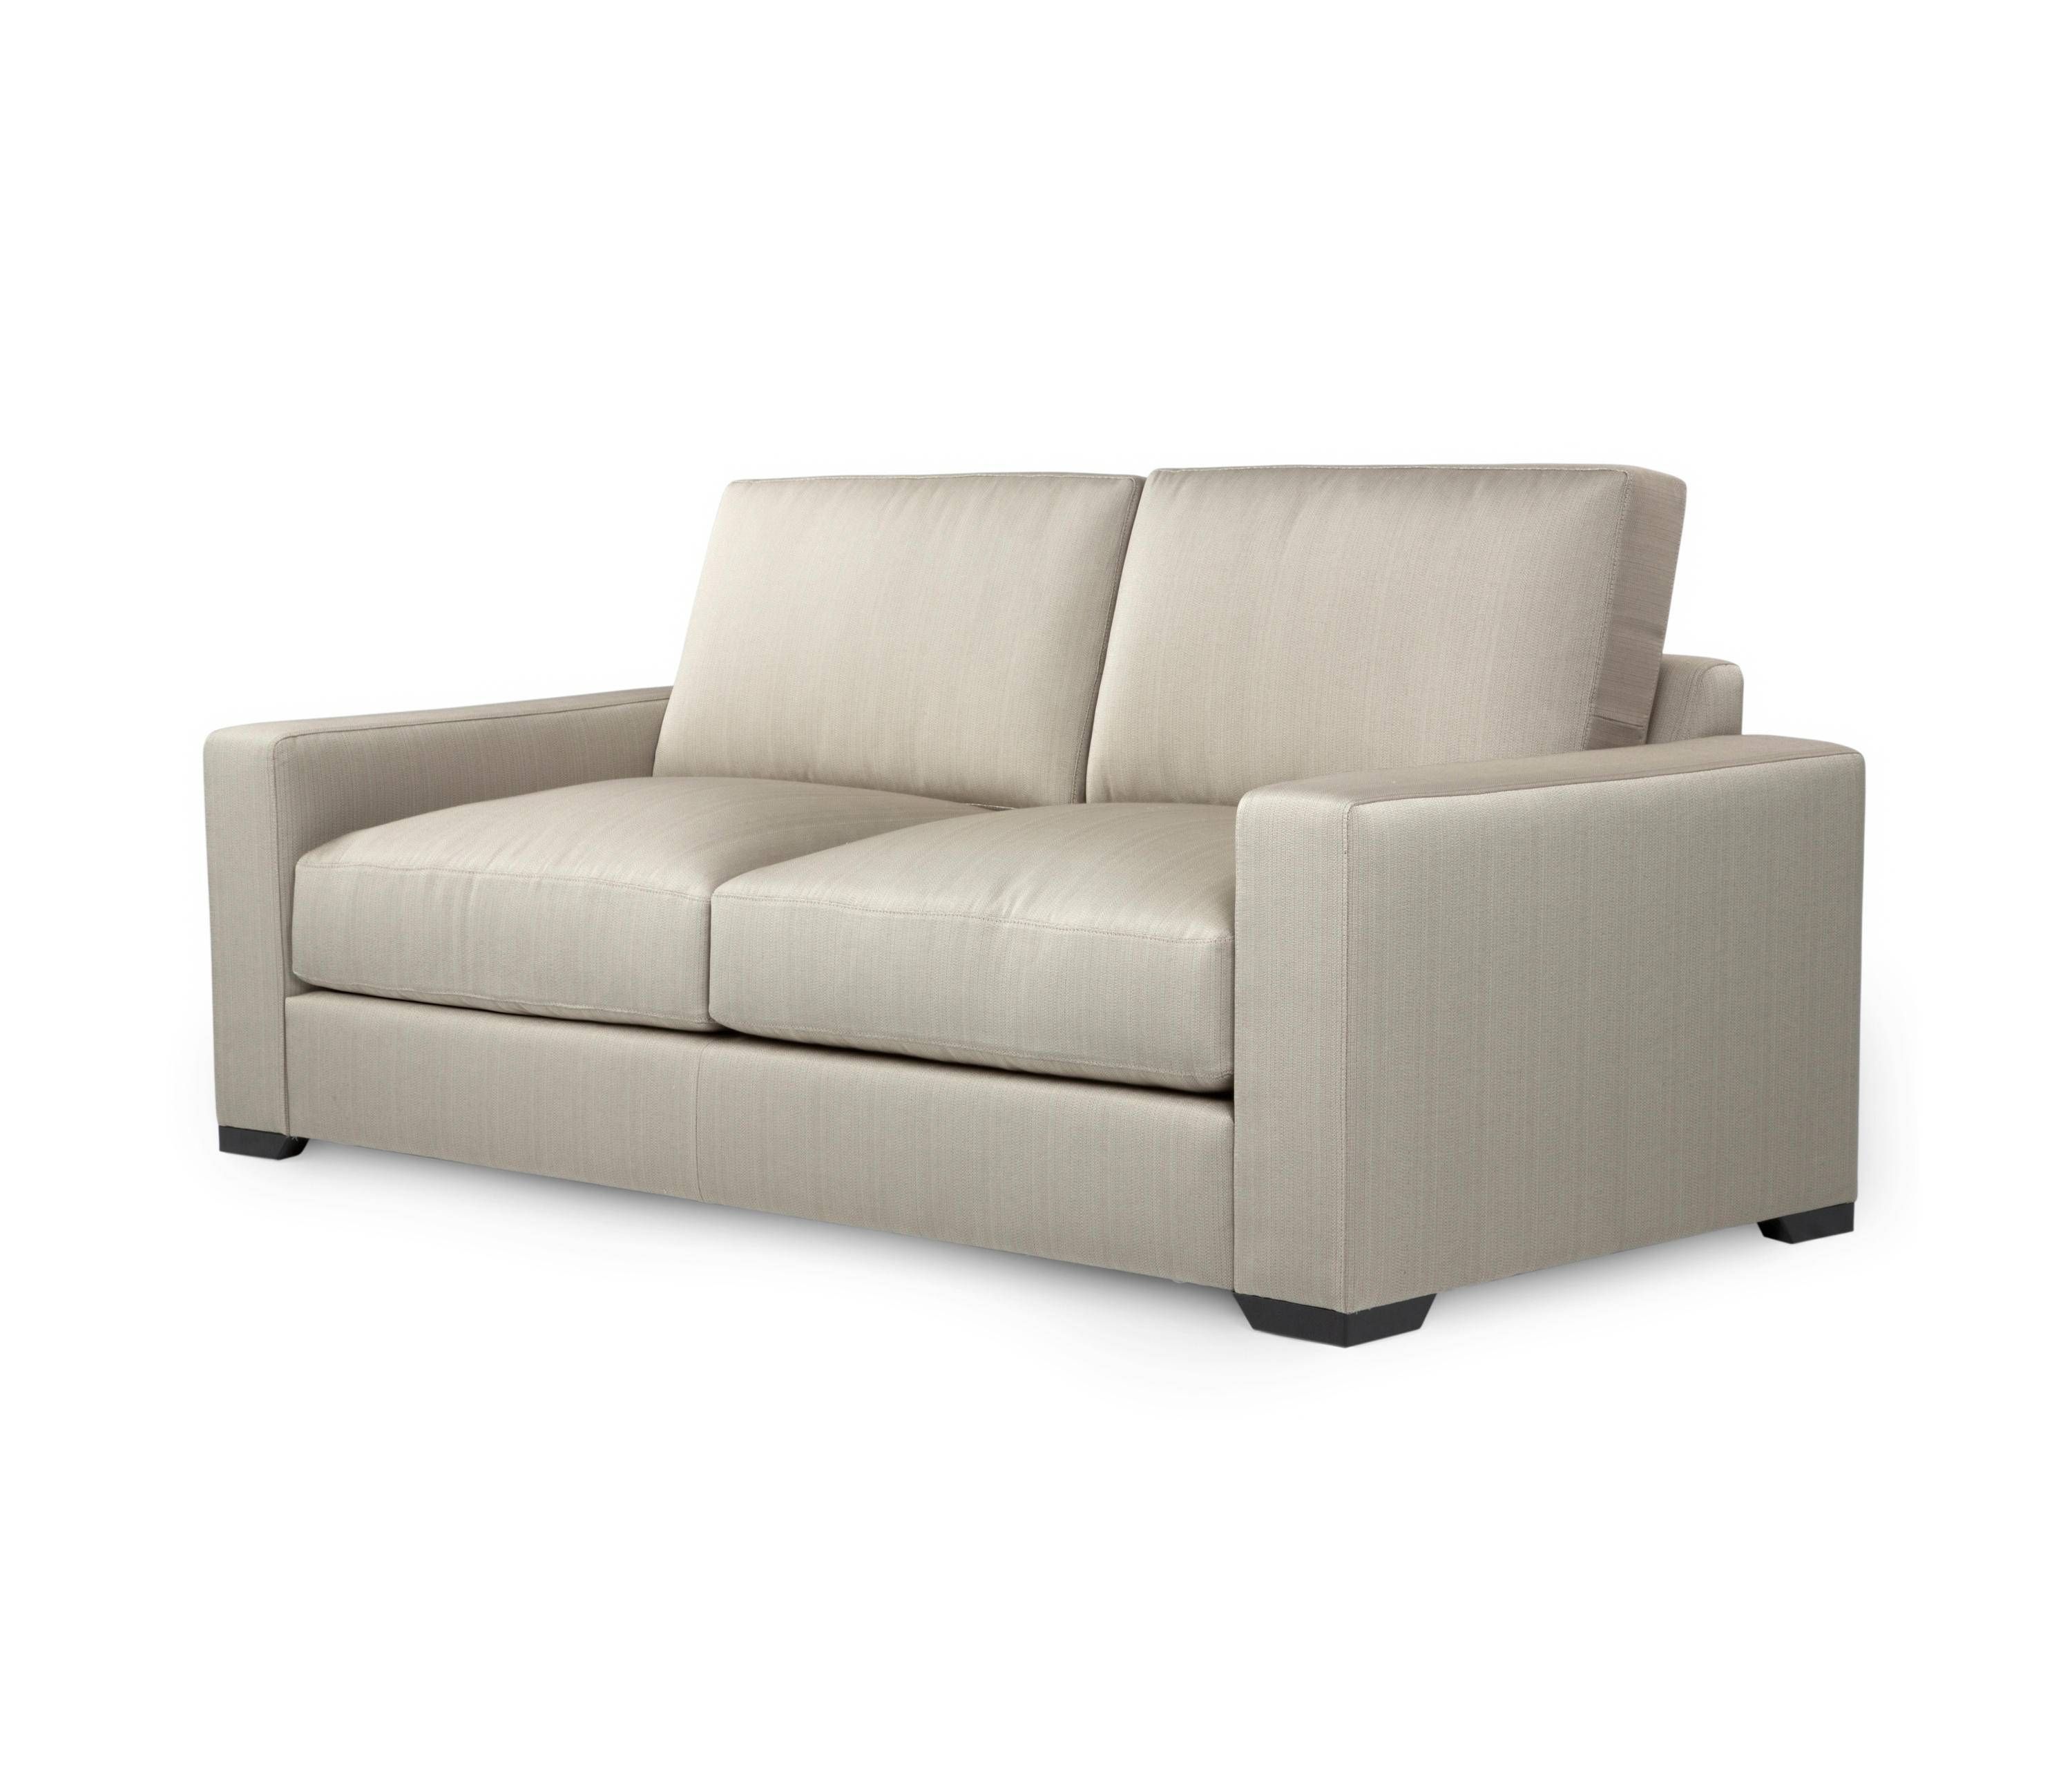 Brancusi Sofa – Lounge Sofas From The Sofa & Chair Company Ltd With Regard To Lounge Sofas And Chairs (View 3 of 12)